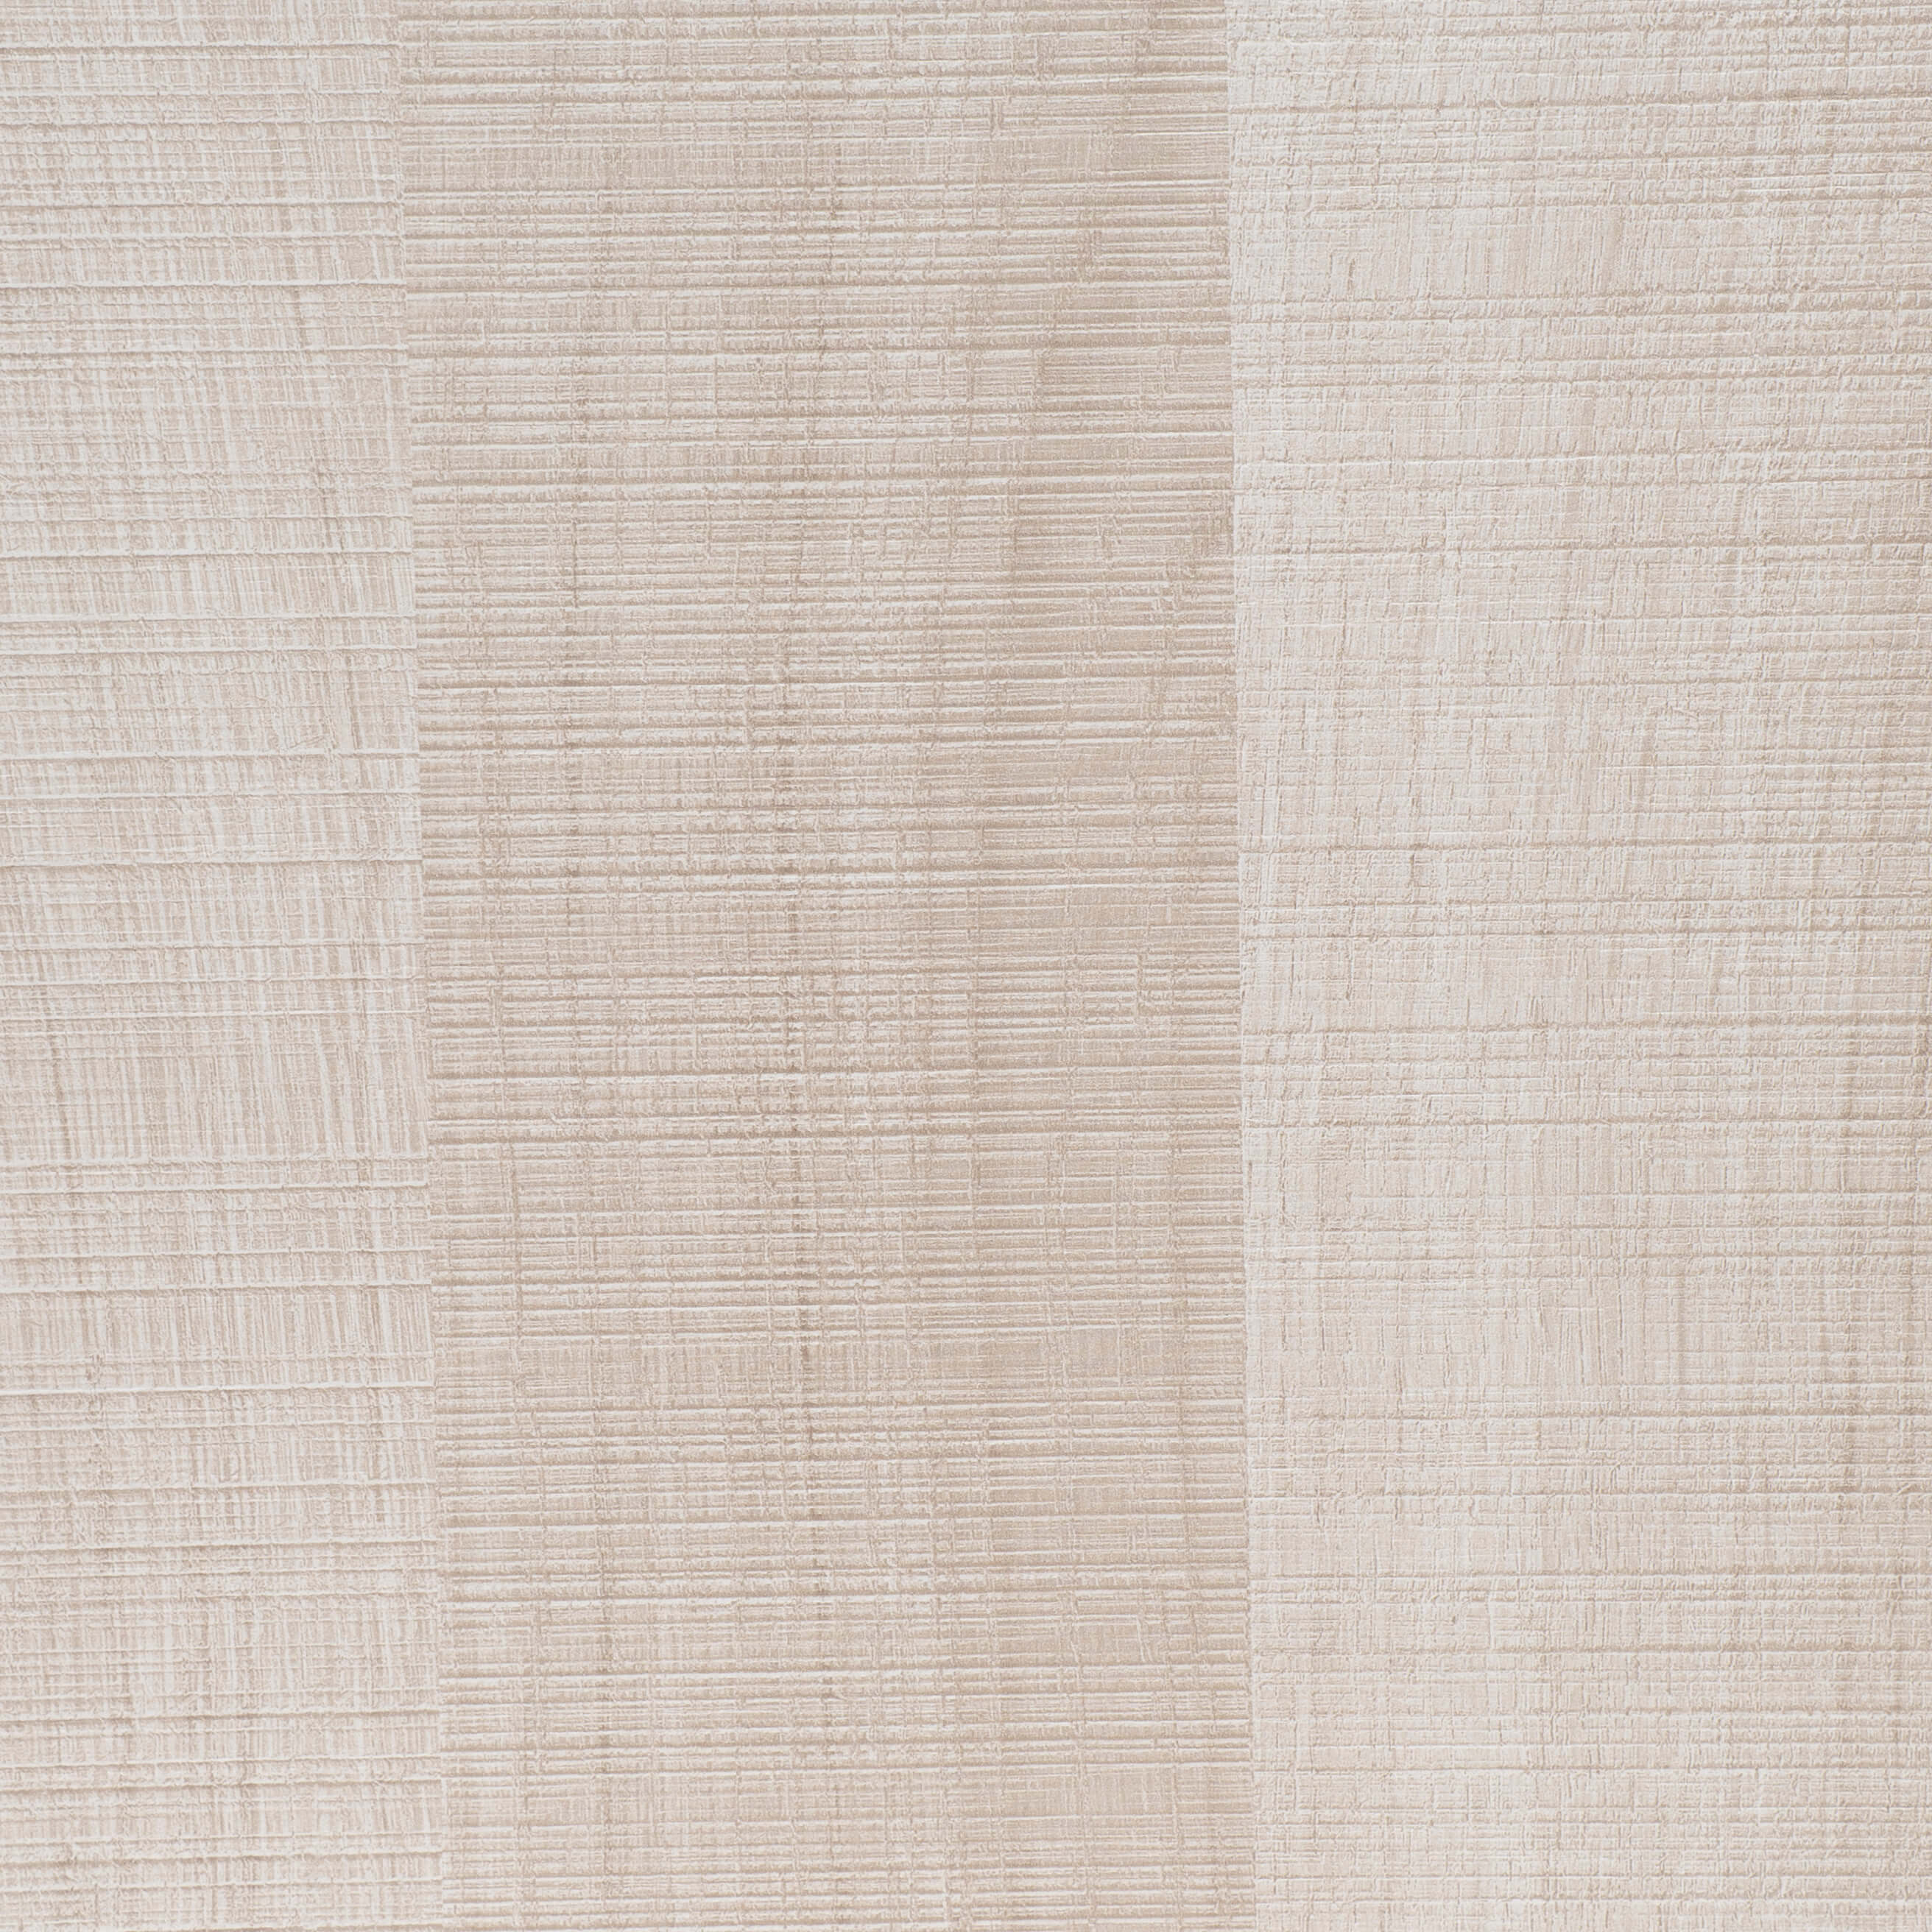 Mod Cabinetry Euro Line Textura Frappe 1 Texture